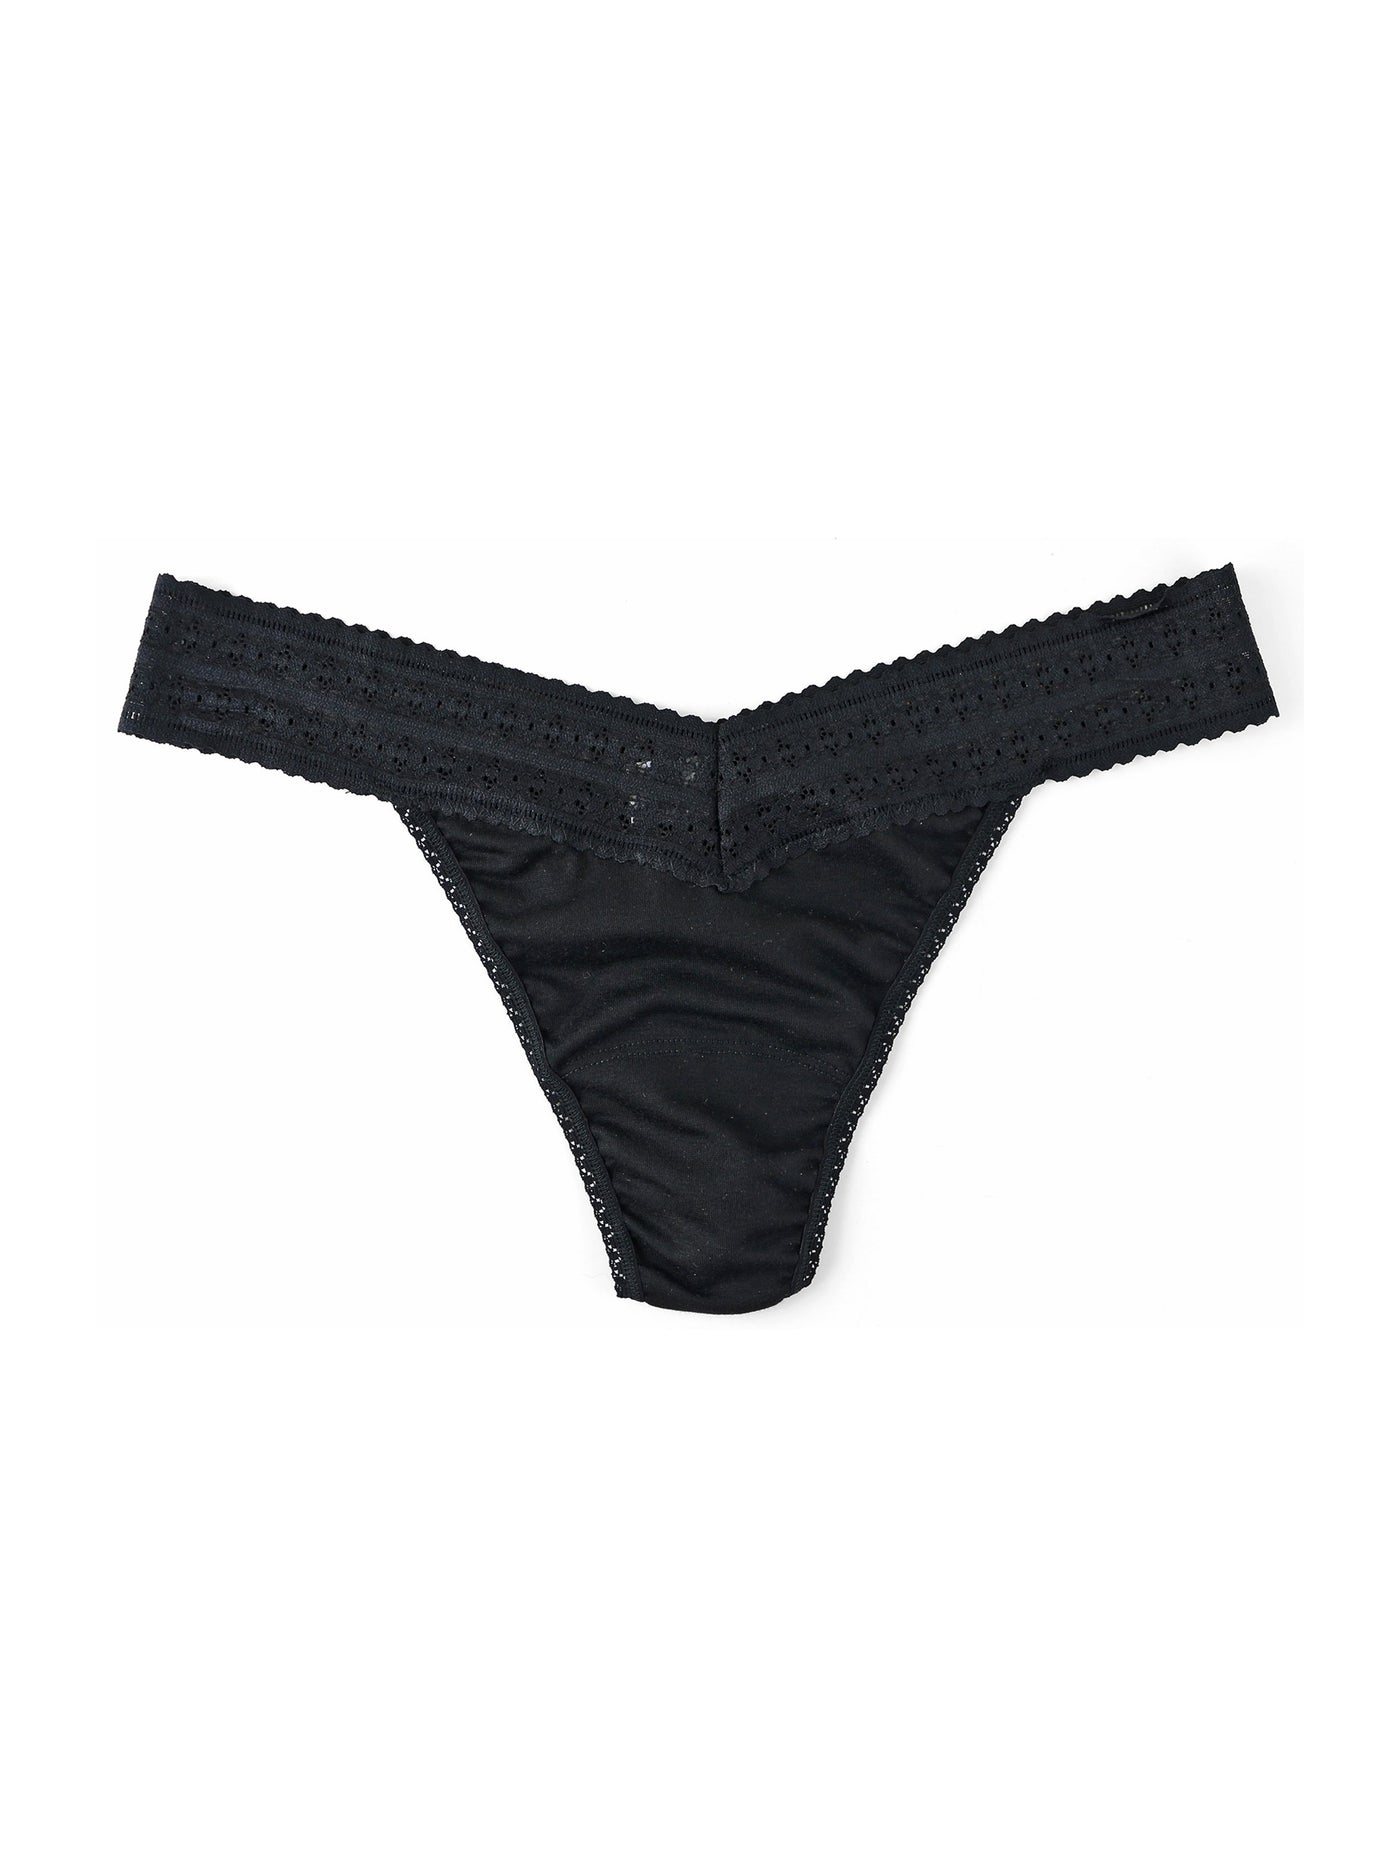 Dream Original Rise Thong Panty | Hanky Panky | Style # 631104 | Made in the USA | Classy Cozy Cool Women’s Clothing Boutique